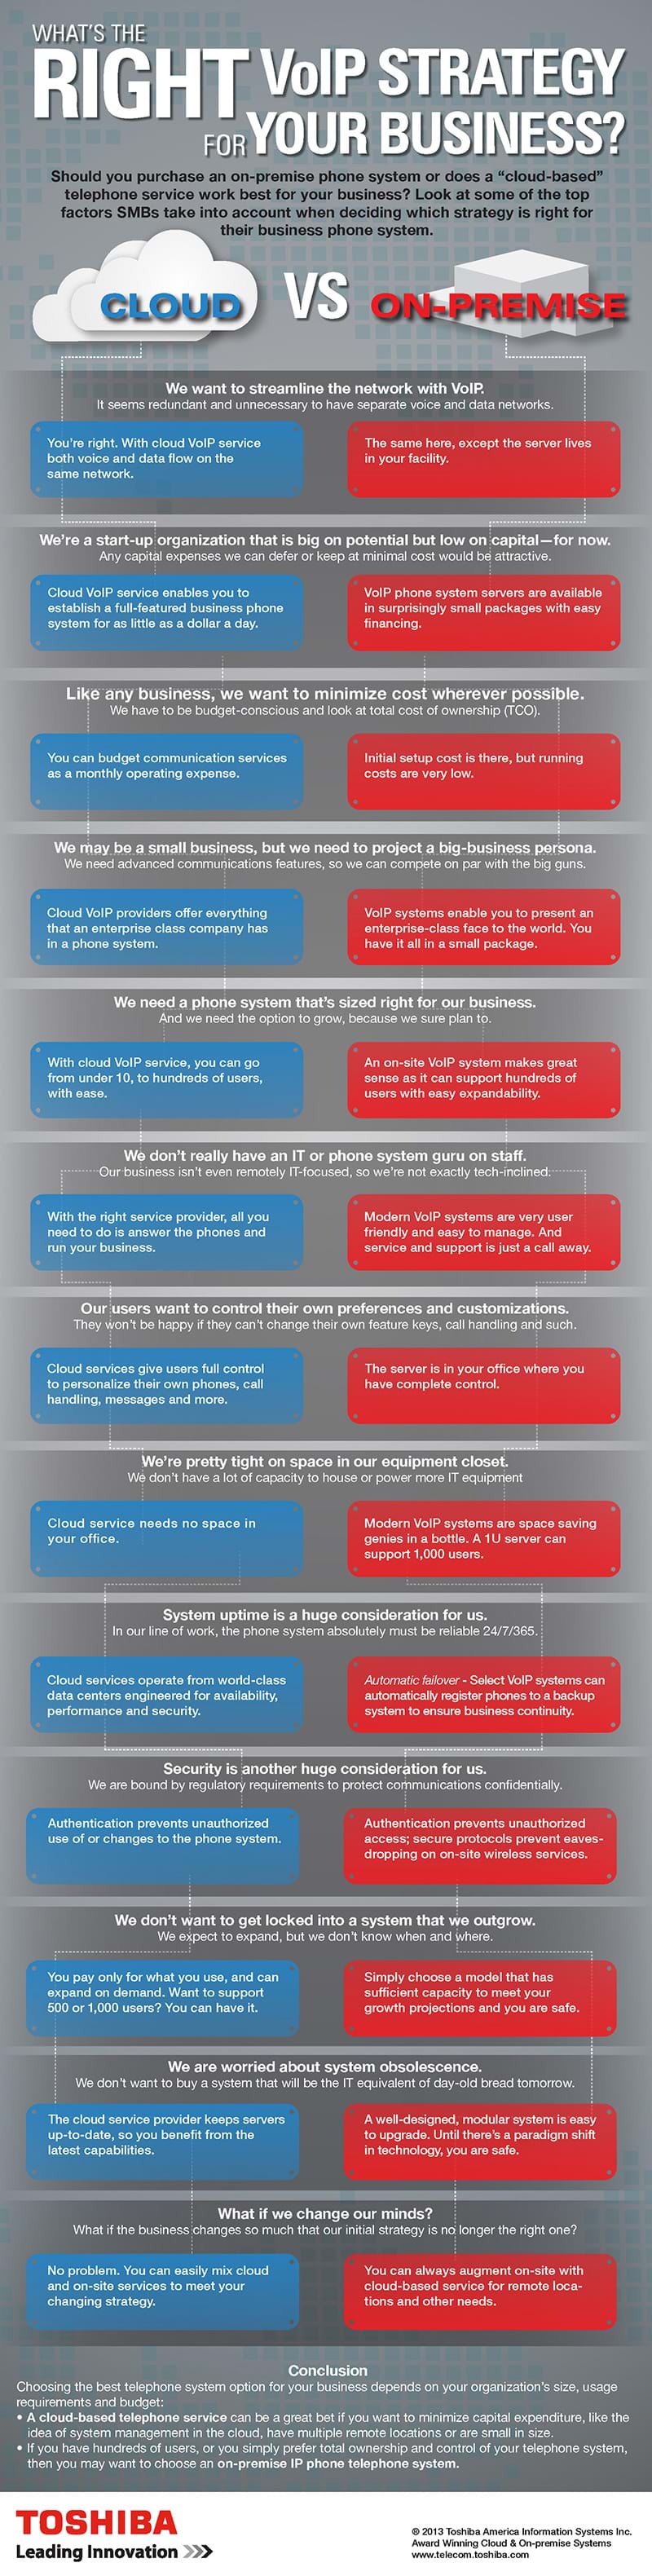 'Should you purchase an on premise phone system or does a cloud-based telephone service work best for your business? Look at some of the top factors SMBs take into account when deciding which strategy is right for the business phone system.' What's the Right VoIP Strategy for Your Business? Infographic